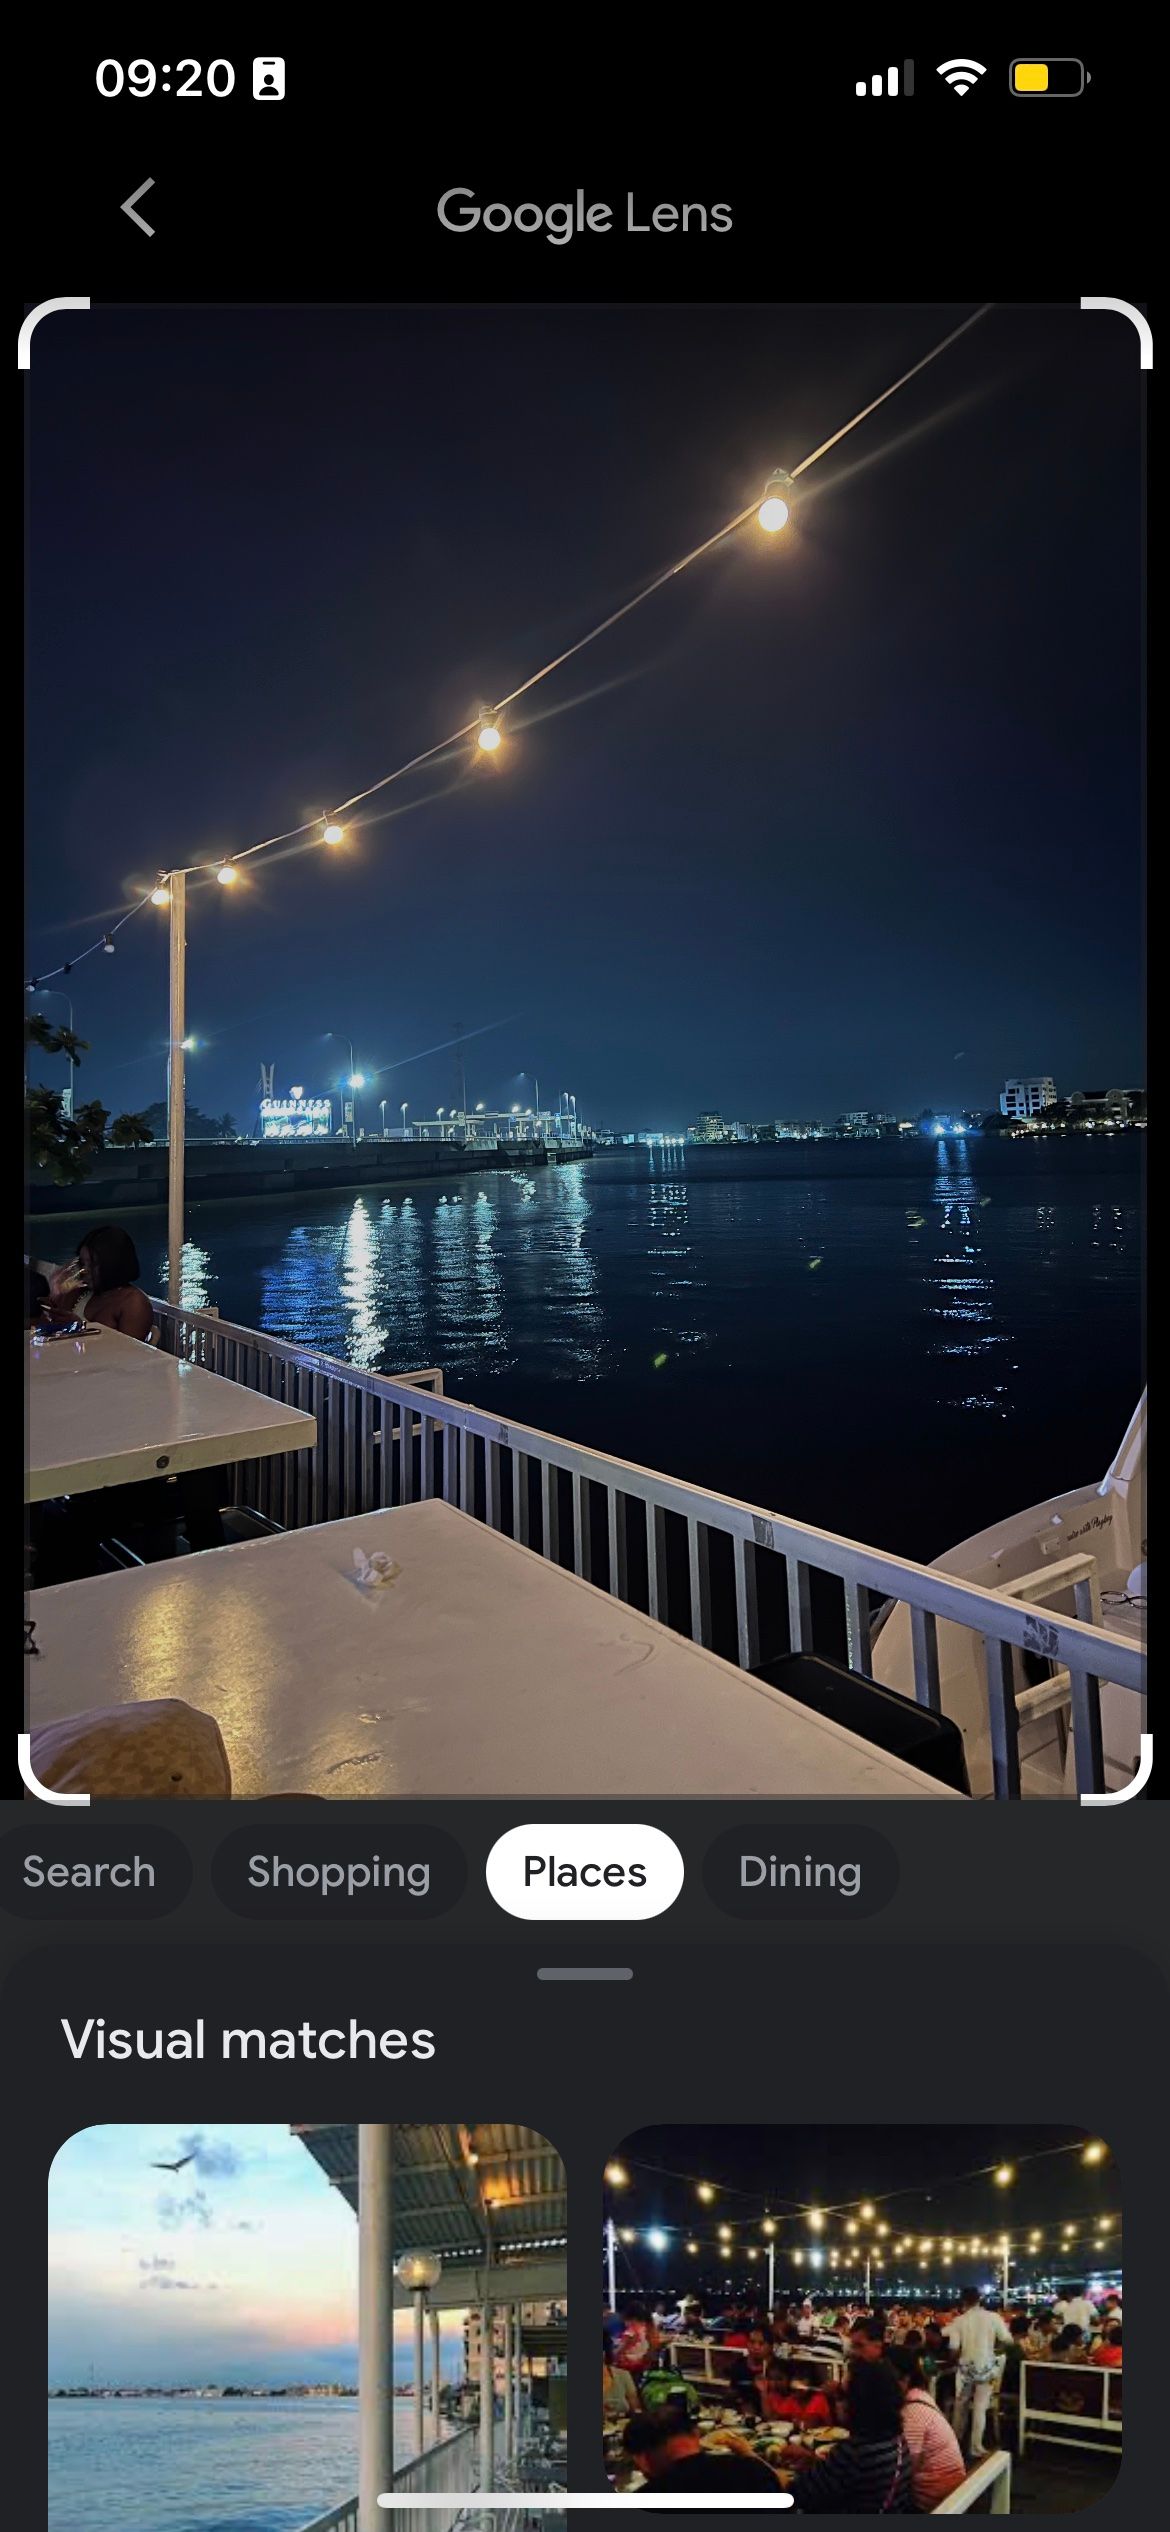 Google Lens searching an image in Google Photos